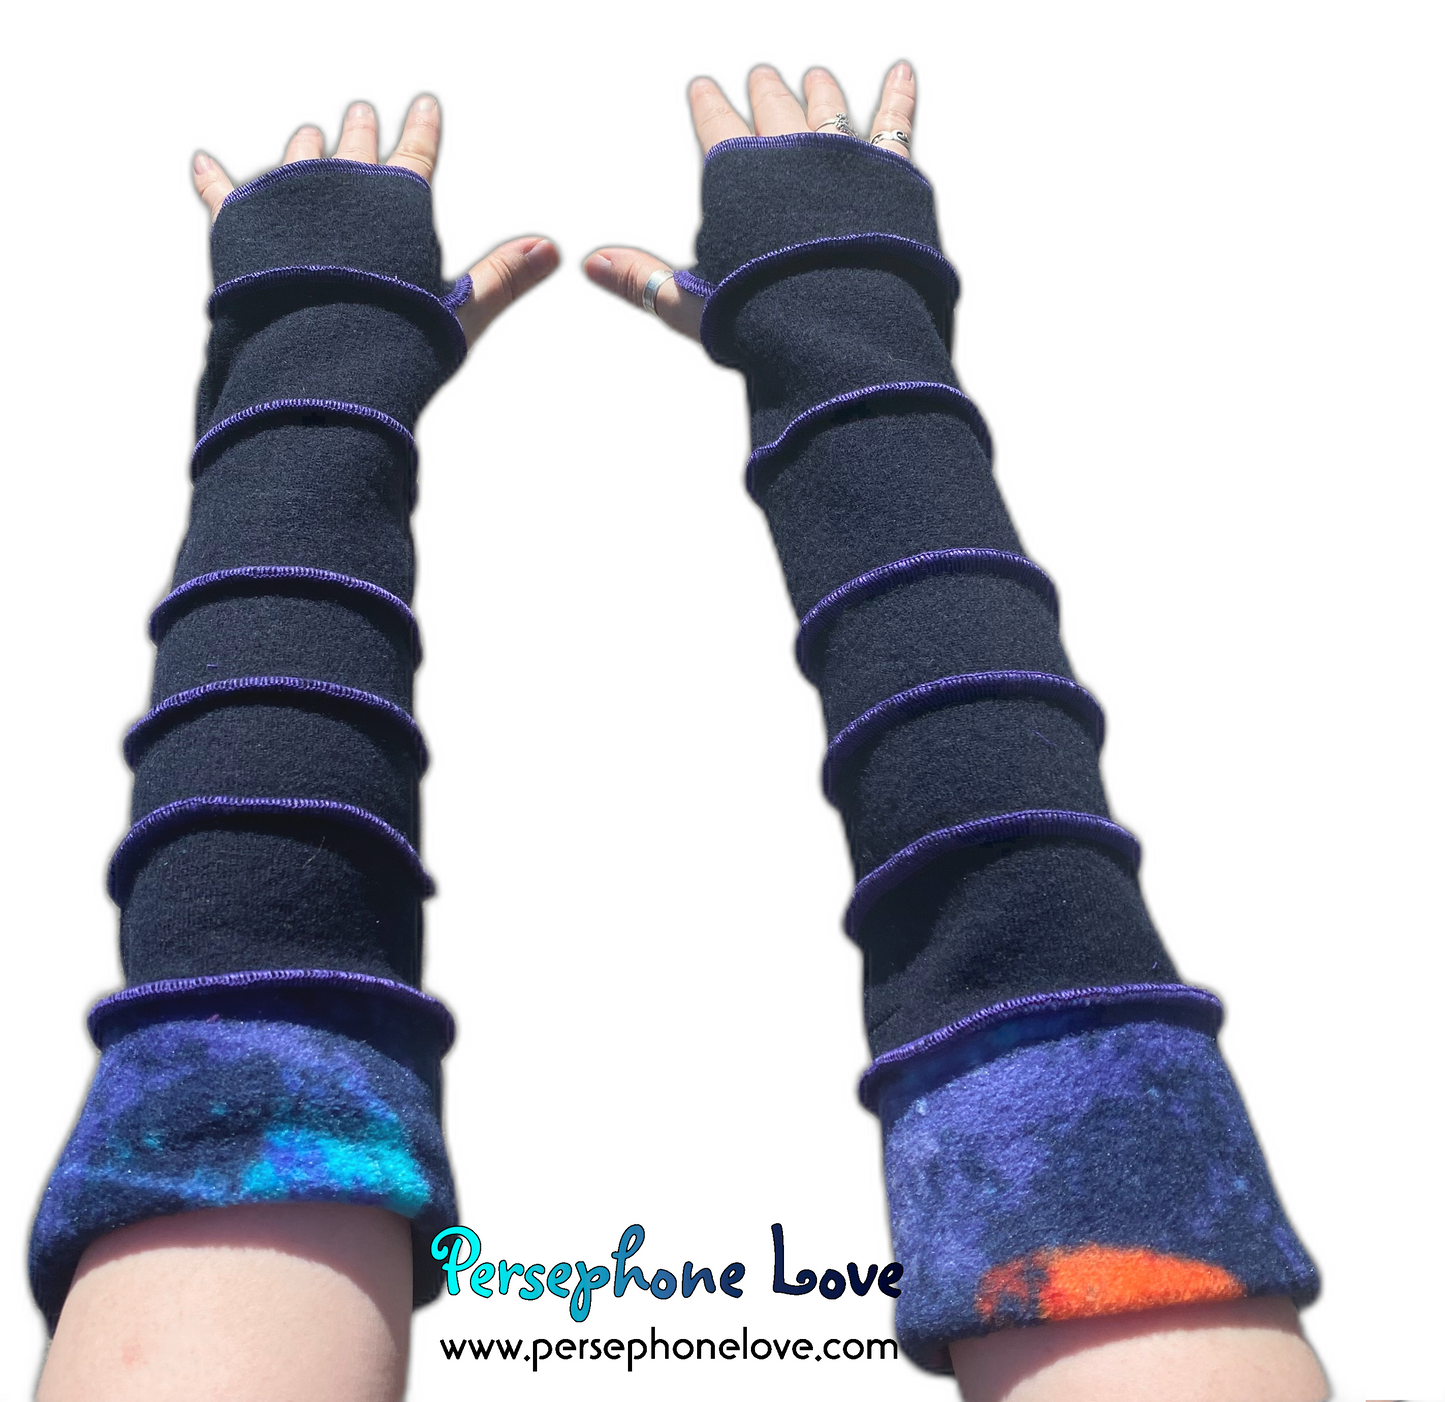 Katwise-inspired felted cashmere/merino arm warmers-1562